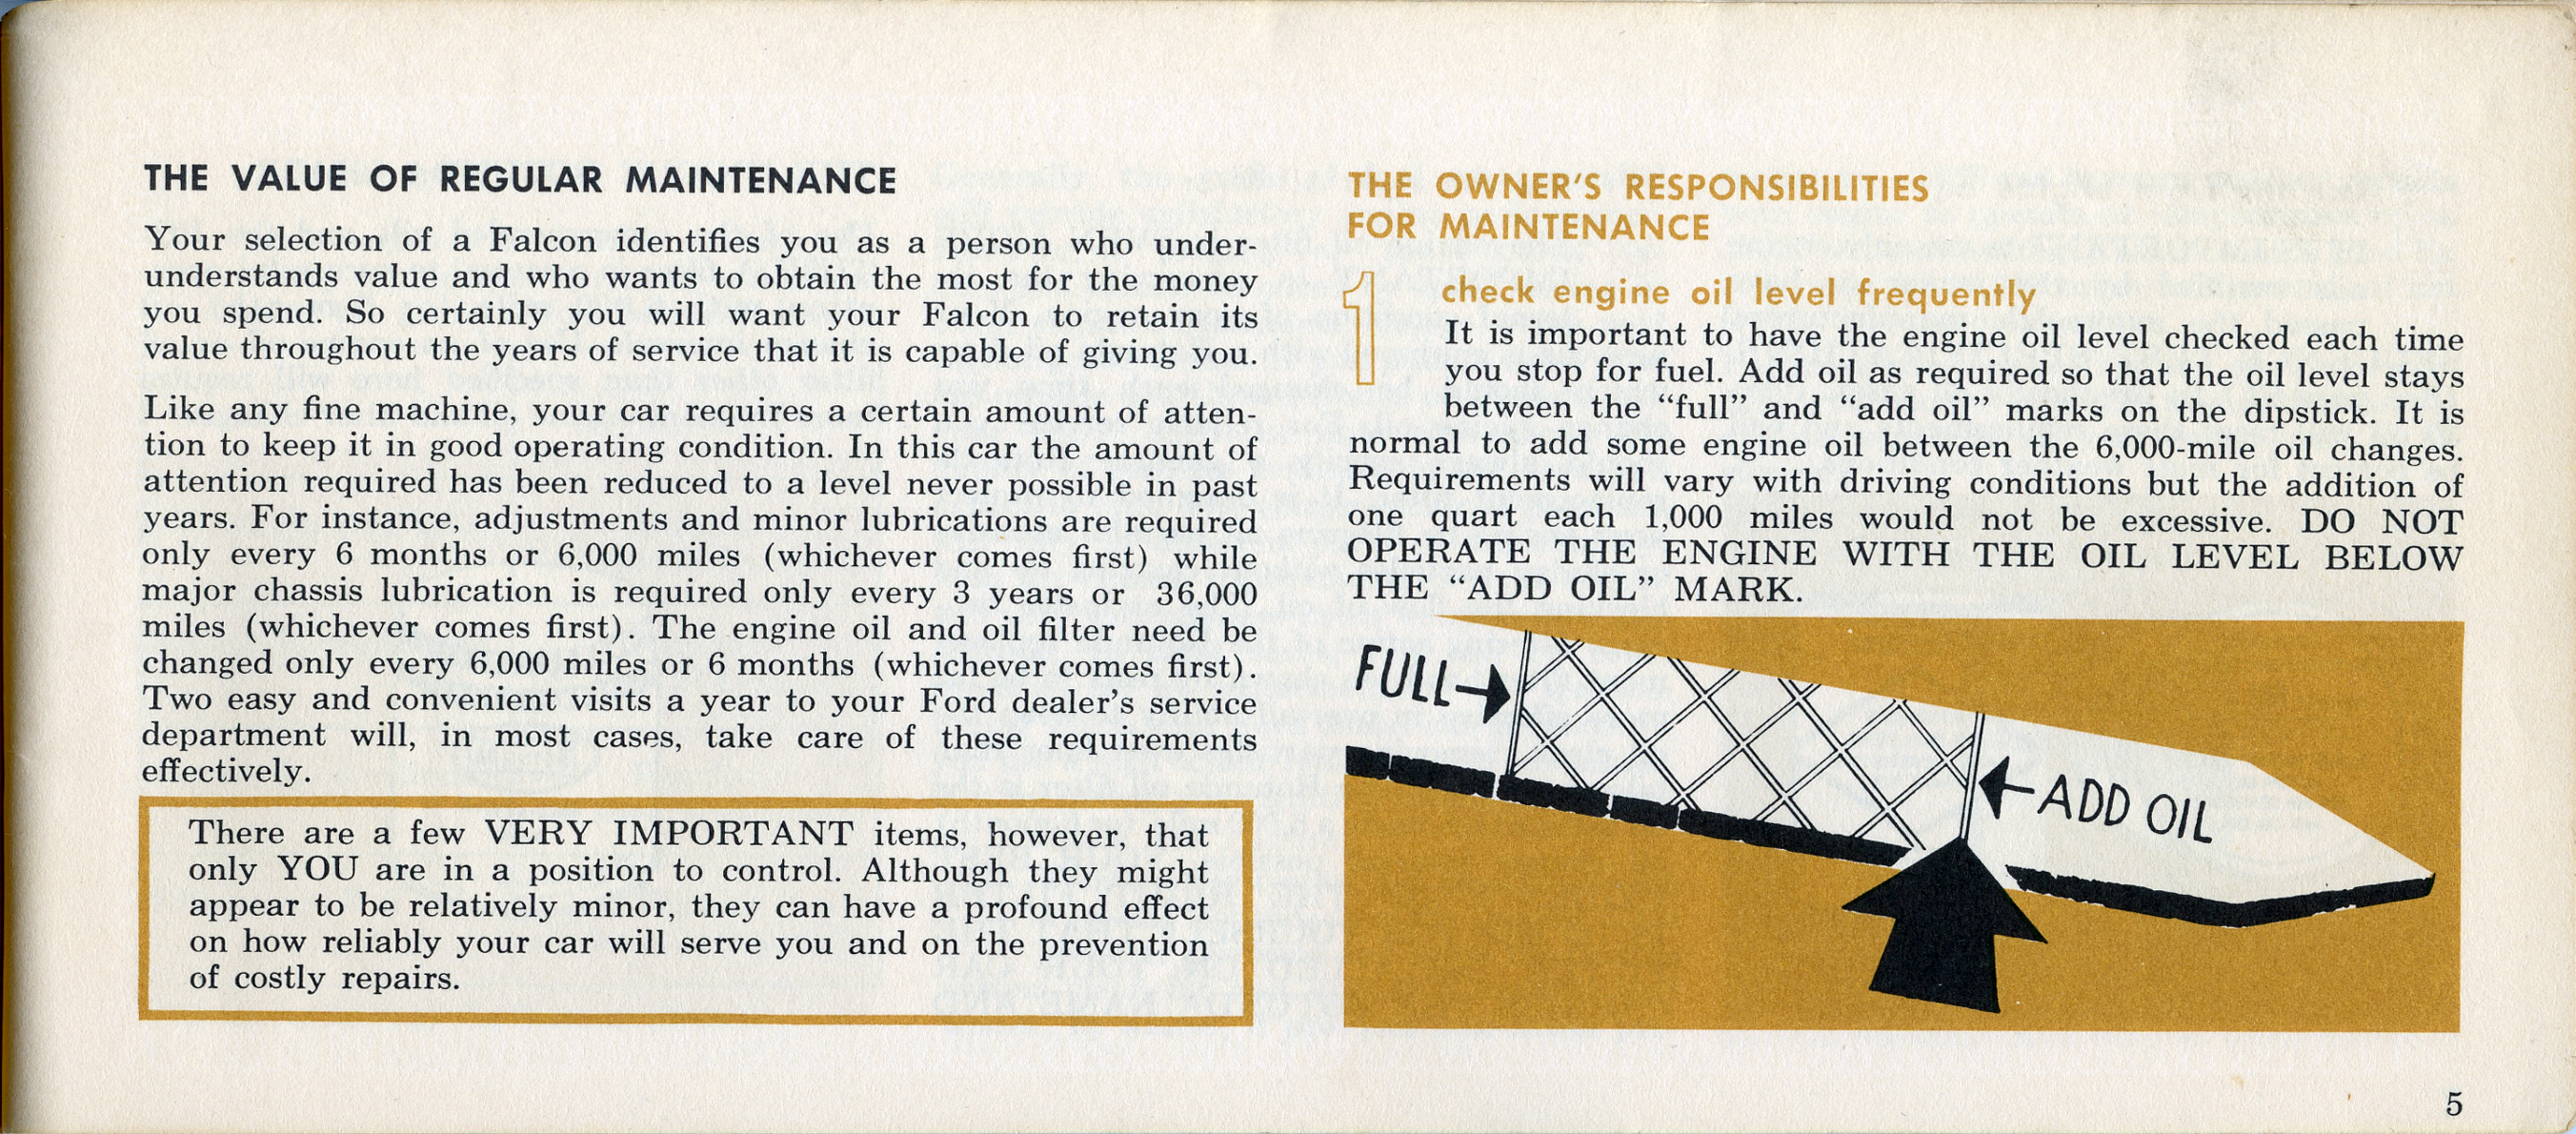 1964 Ford Falcon Owners Manual-05